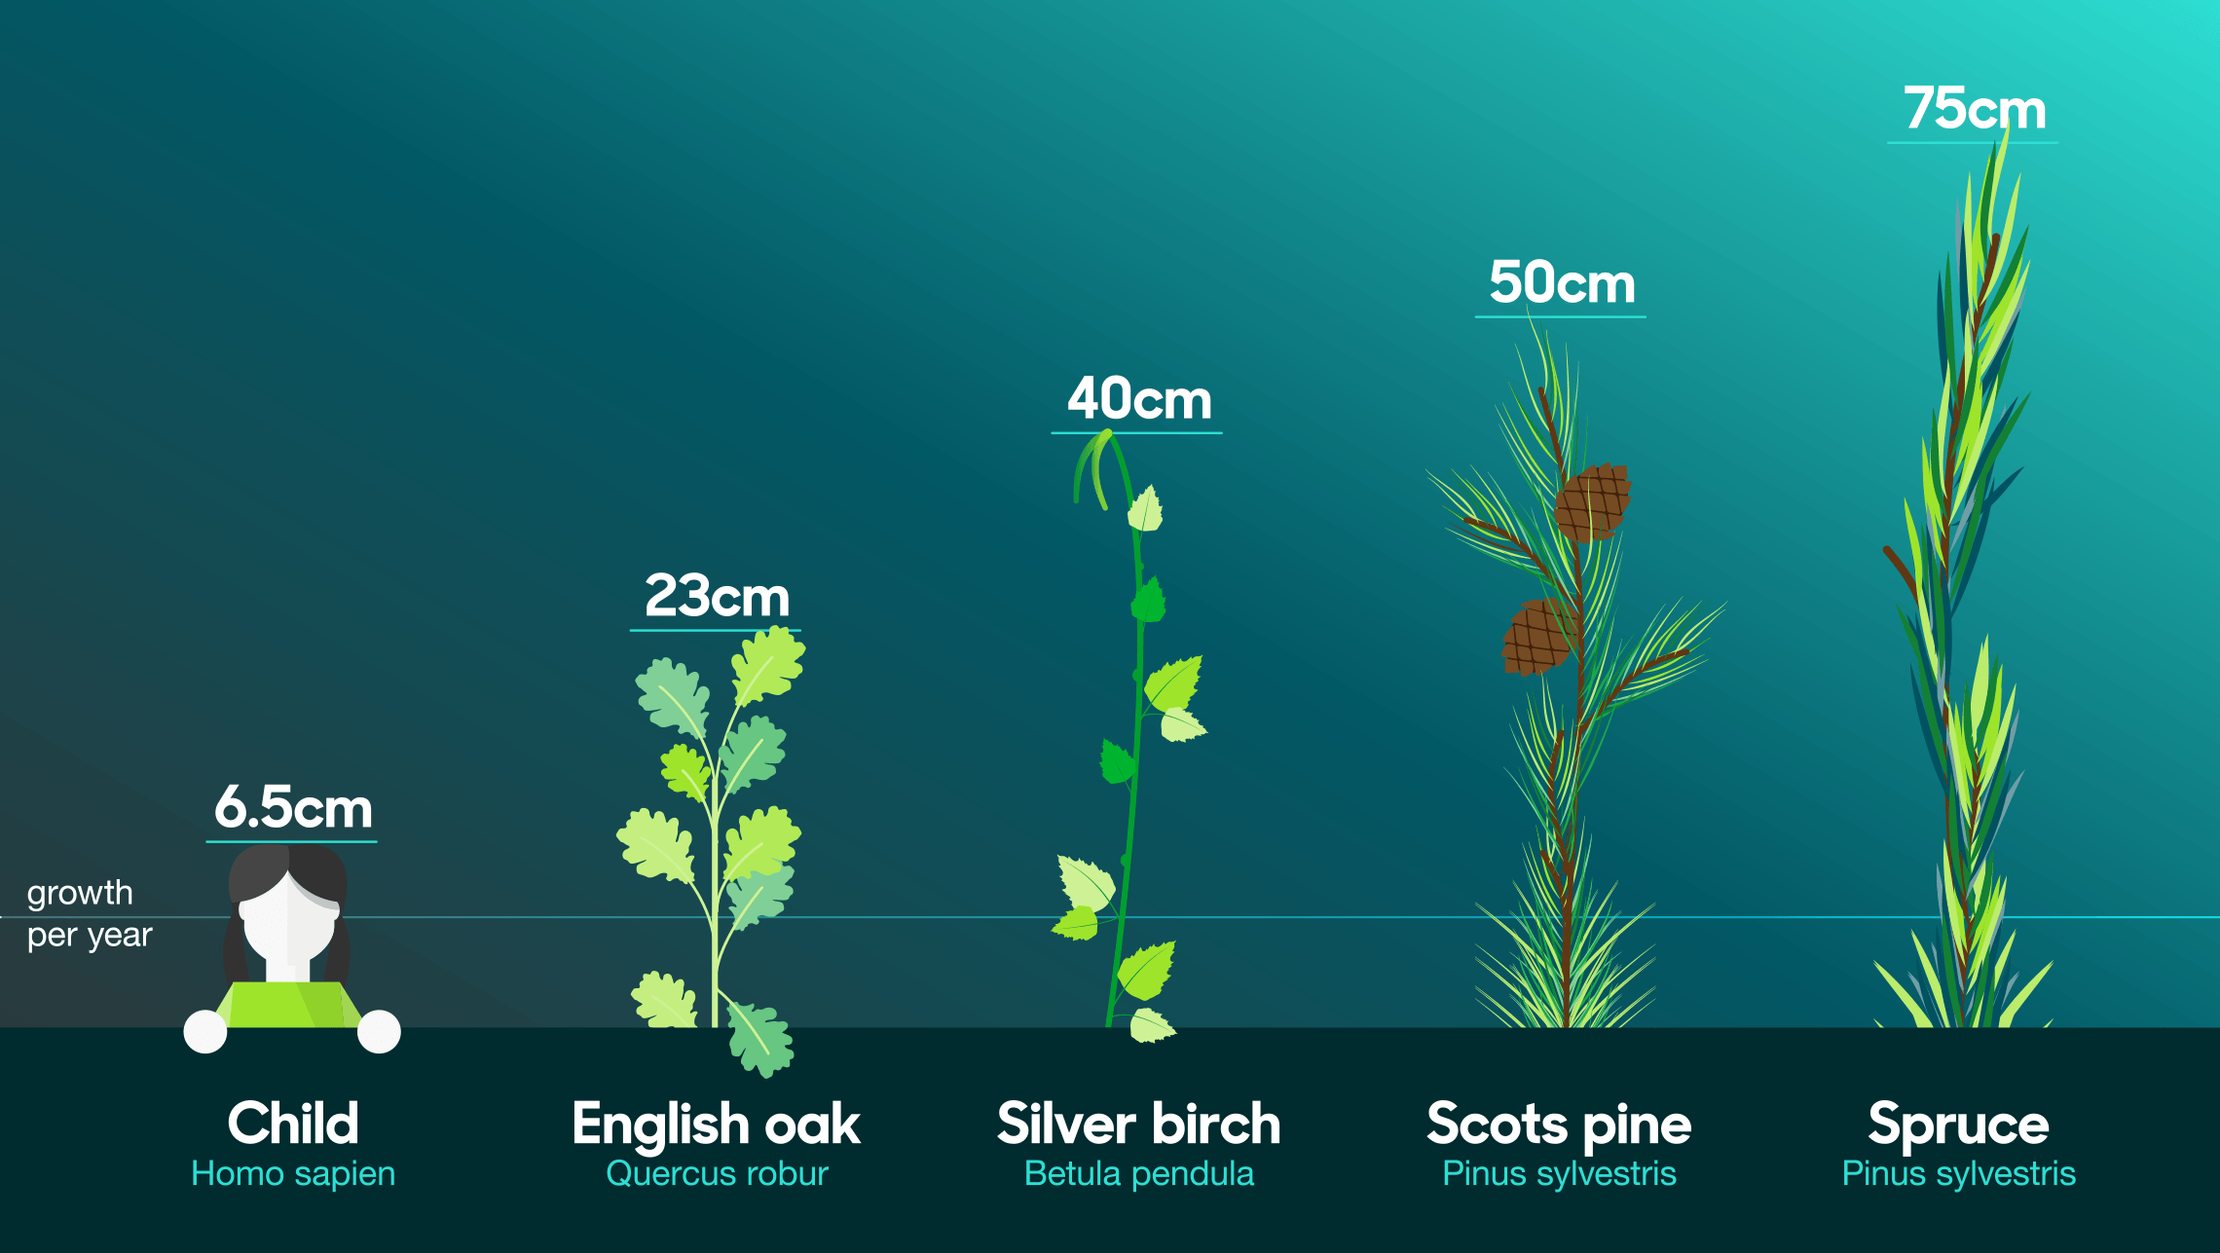 A graphic comparing how much different plants grow per year with a human child's average growth per year for comparison. While a child grows at 6.5 centimetres per year, the four plants shown all grow more than this, with spruce growing 75 centimetres in the same time period.